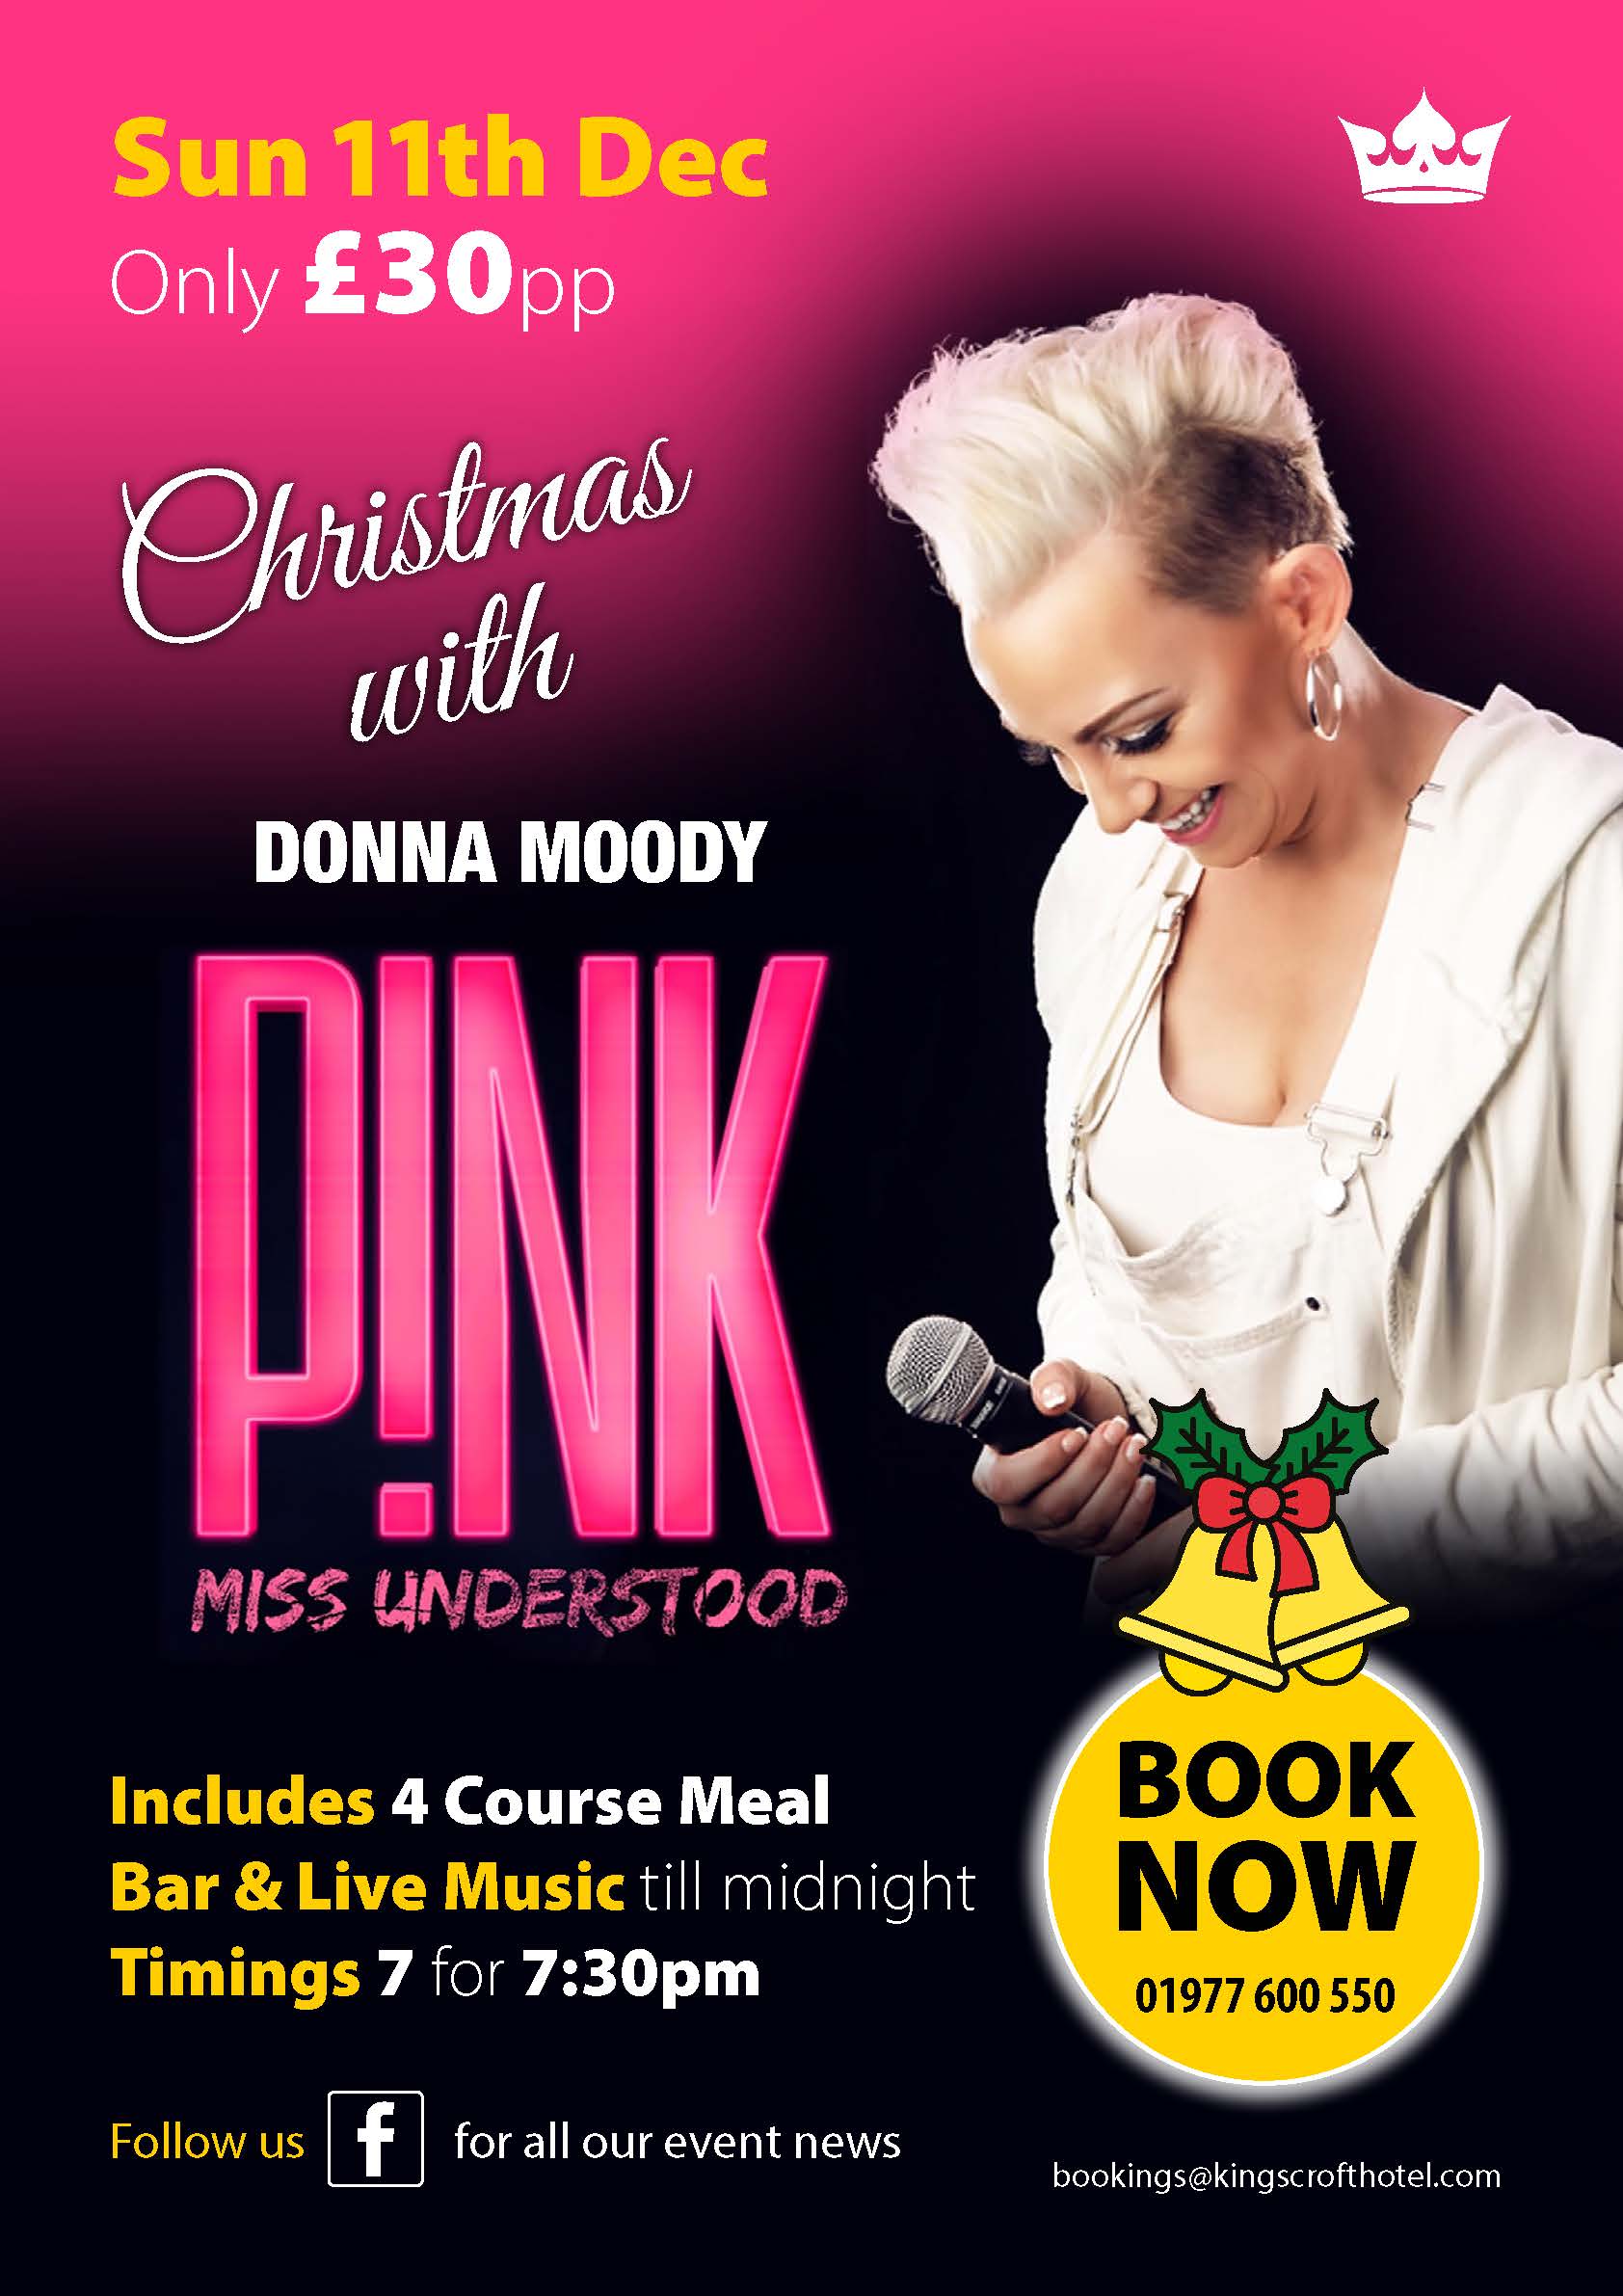 Donna Moody as Pink